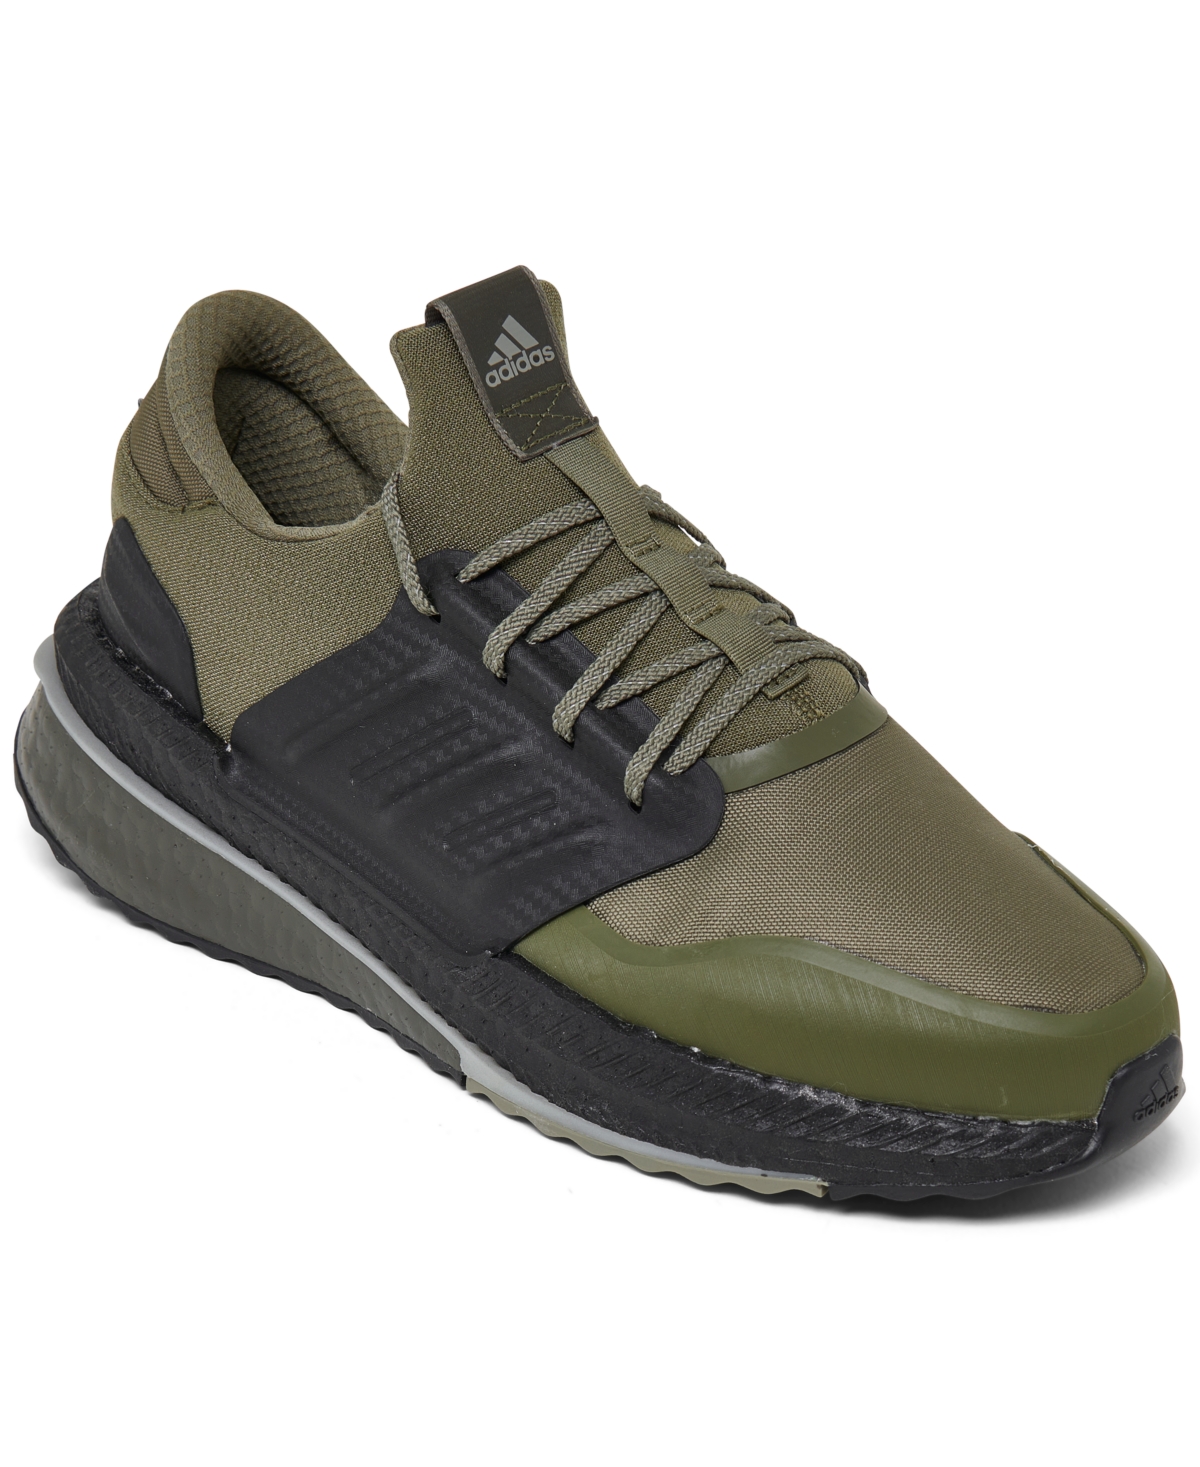 Adidas Originals Men's X Plr Boost Running Sneakers From Finish Line In Olive,black